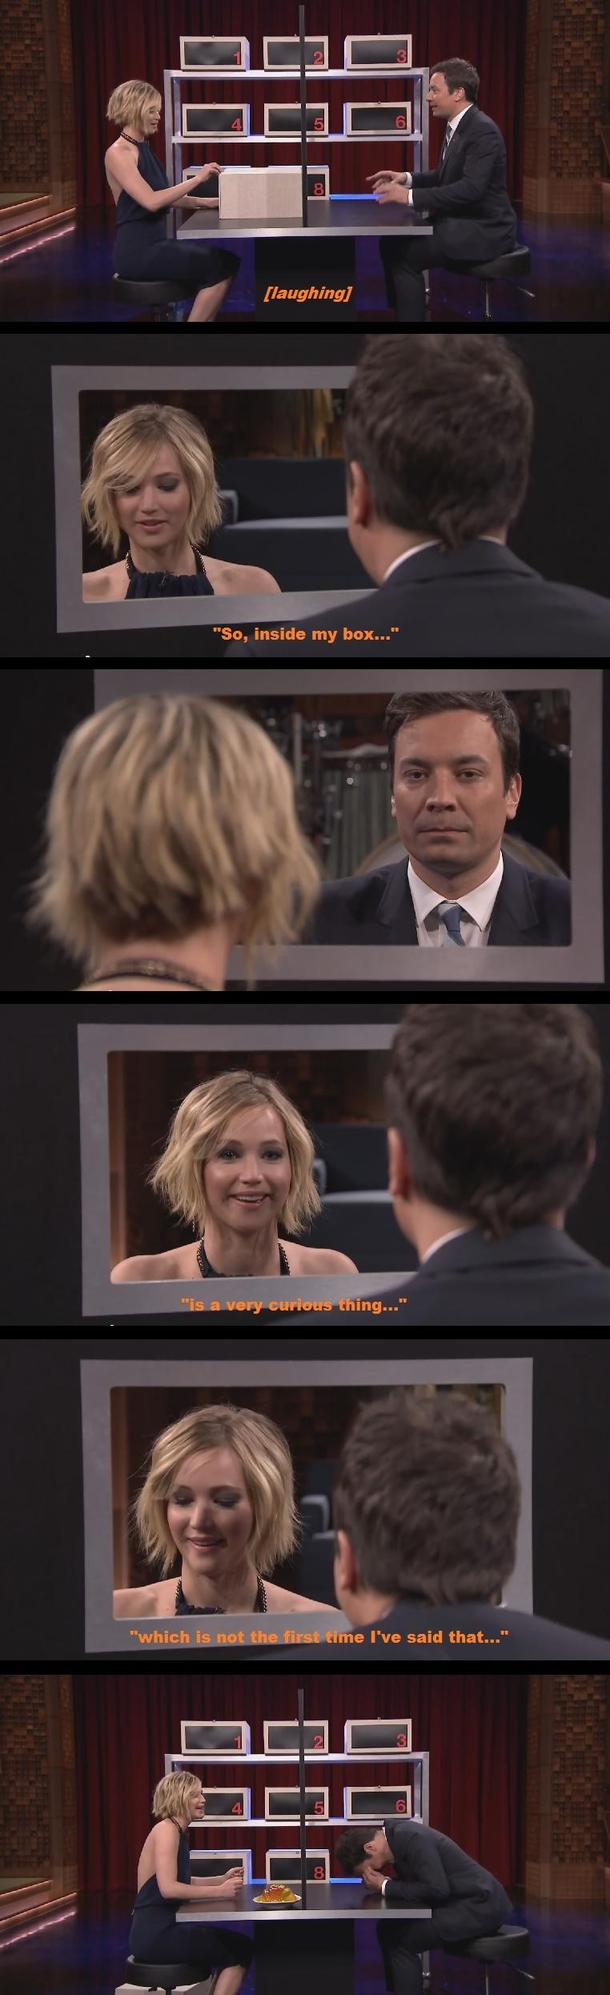 Jennifer Lawrence plays Box of Lies on The Tonight Show